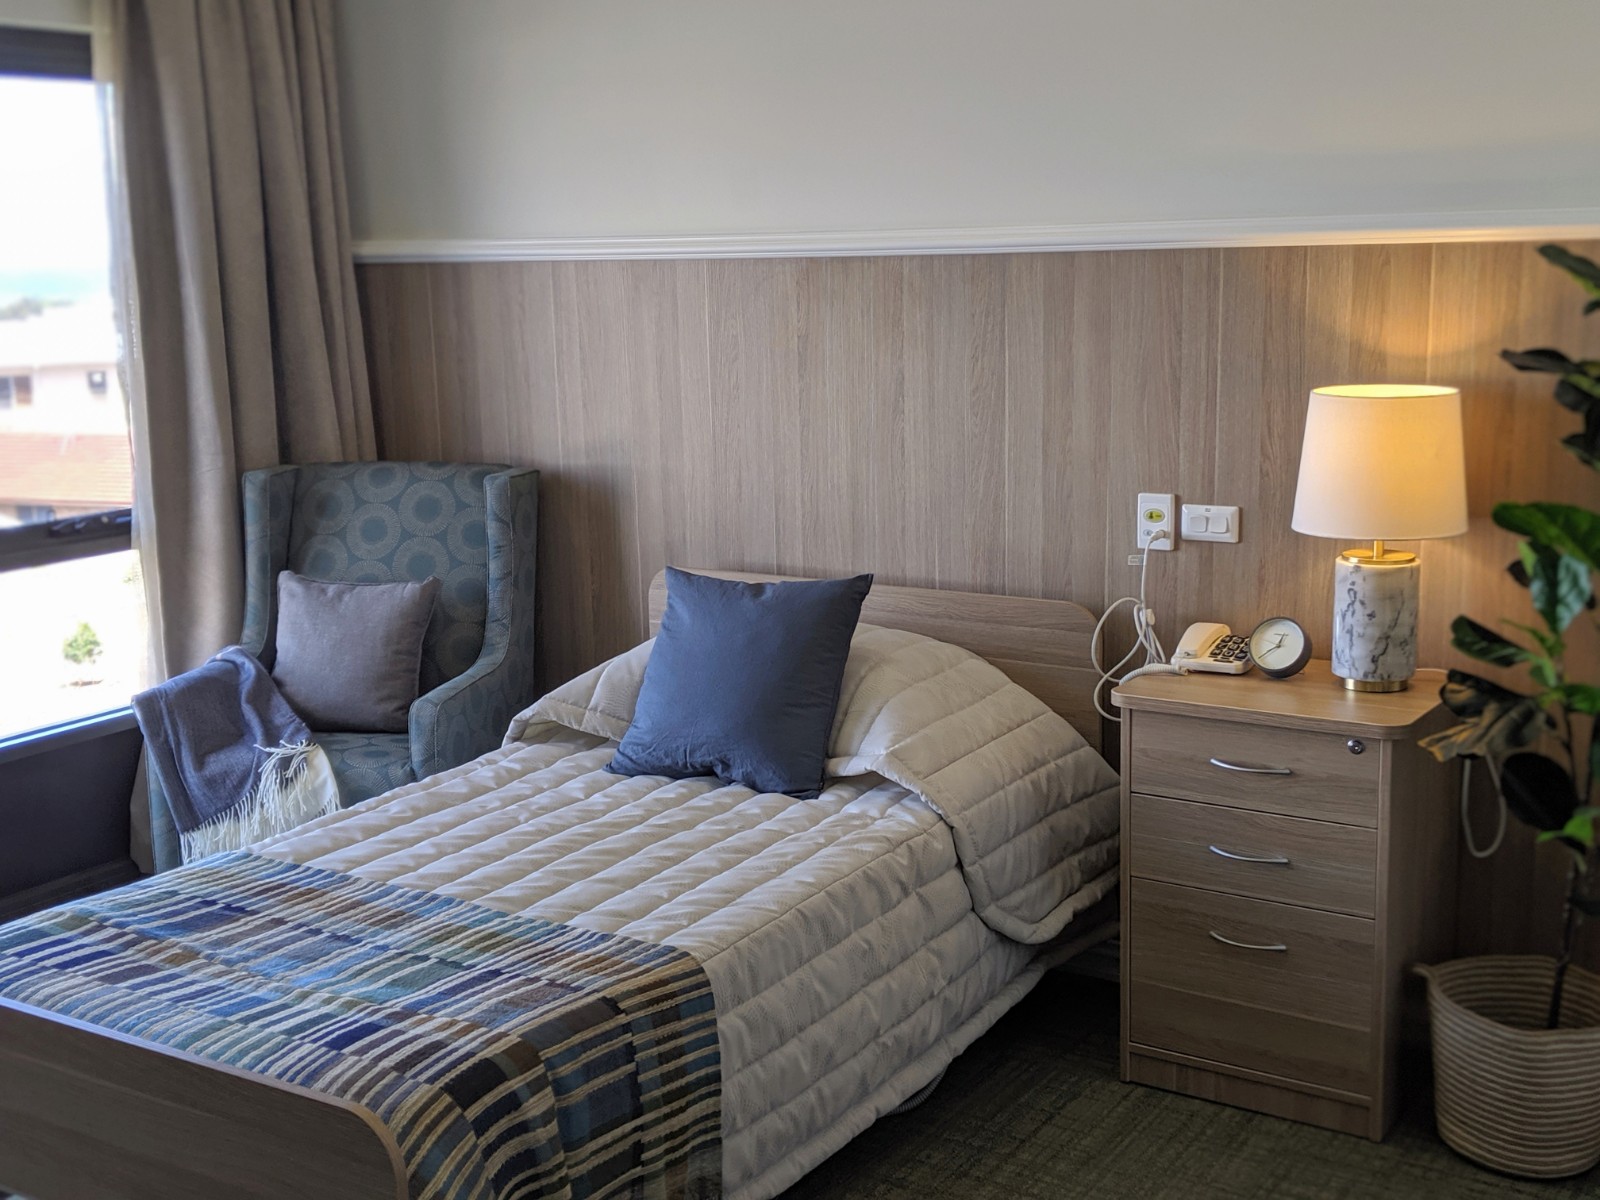 Newcastle aged care home single room with ensuite bathroom